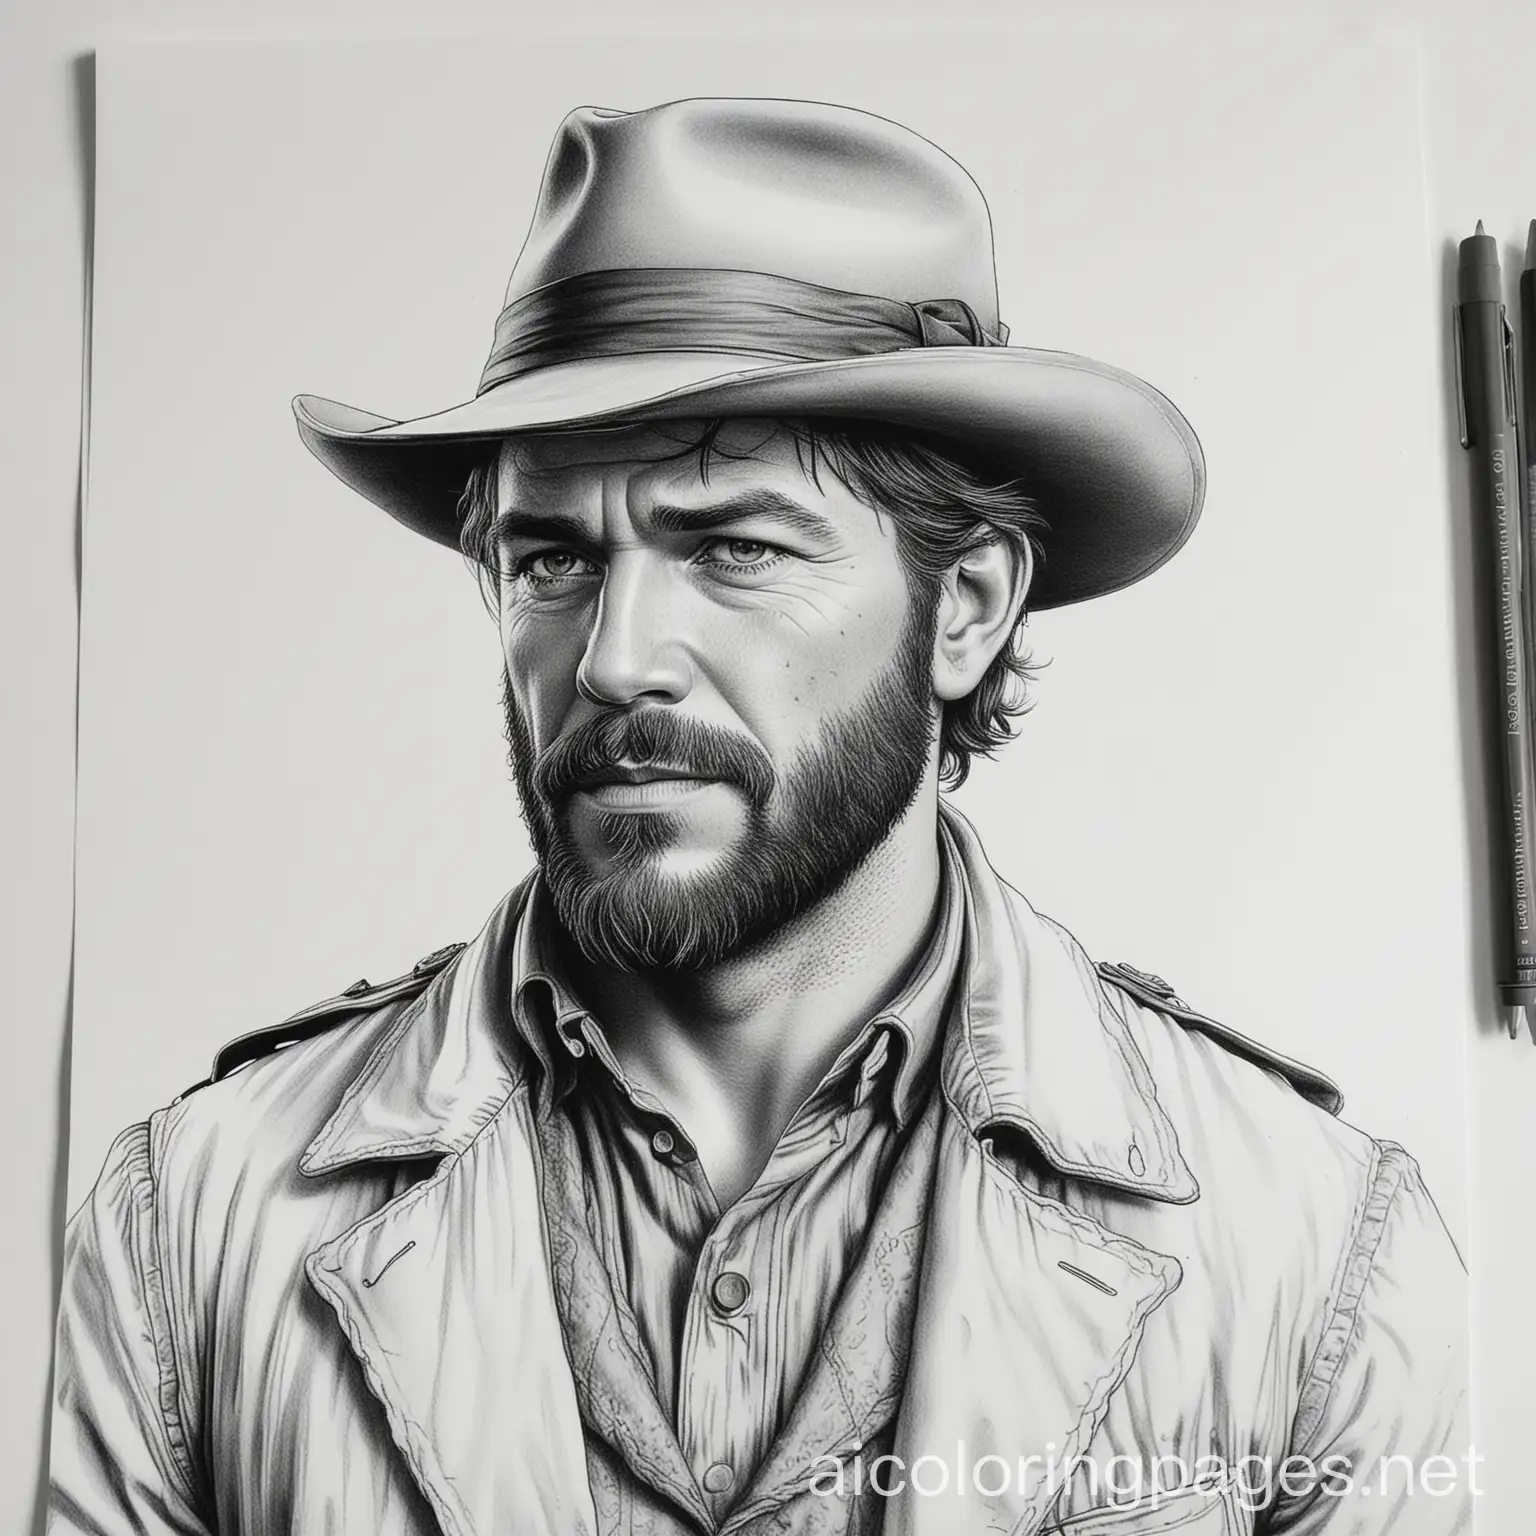 1899 Arthur Morgan in modern times, Coloring Page, black and white, line art, white background, Simplicity, Ample White Space. The background of the coloring page is plain white to make it easy for young children to color within the lines. The outlines of all the subjects are easy to distinguish, making it simple for kids to color without too much difficulty